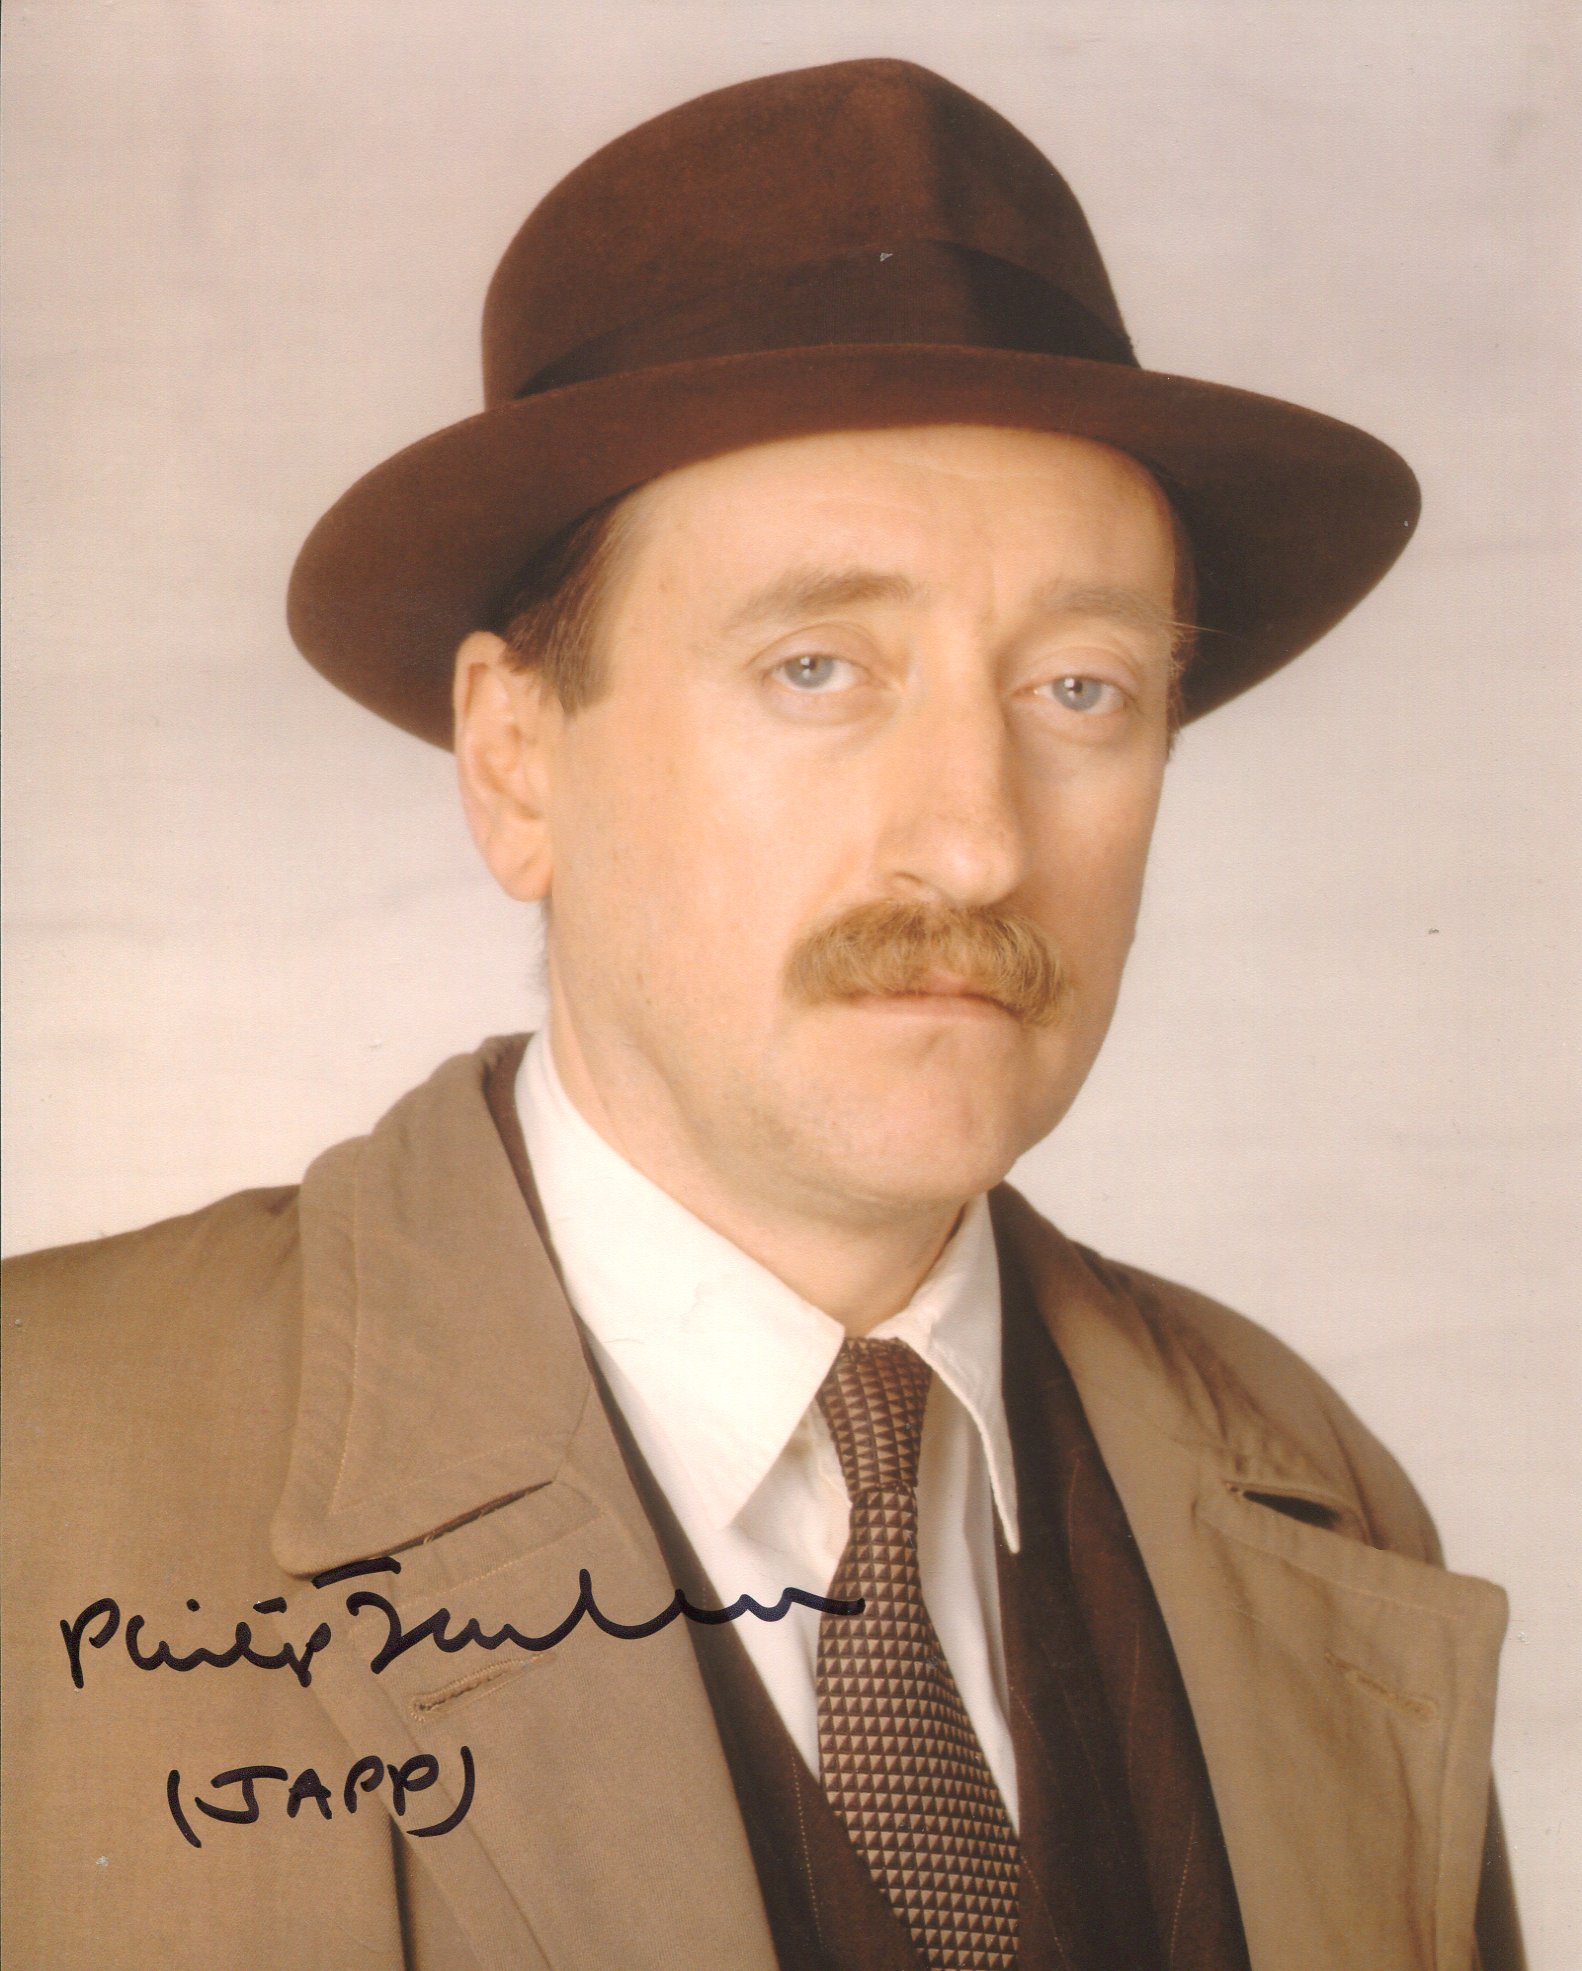 Poirot 8x10 photo signed by actor Philip Jackson as Inspector Japp. Good condition. All autographs